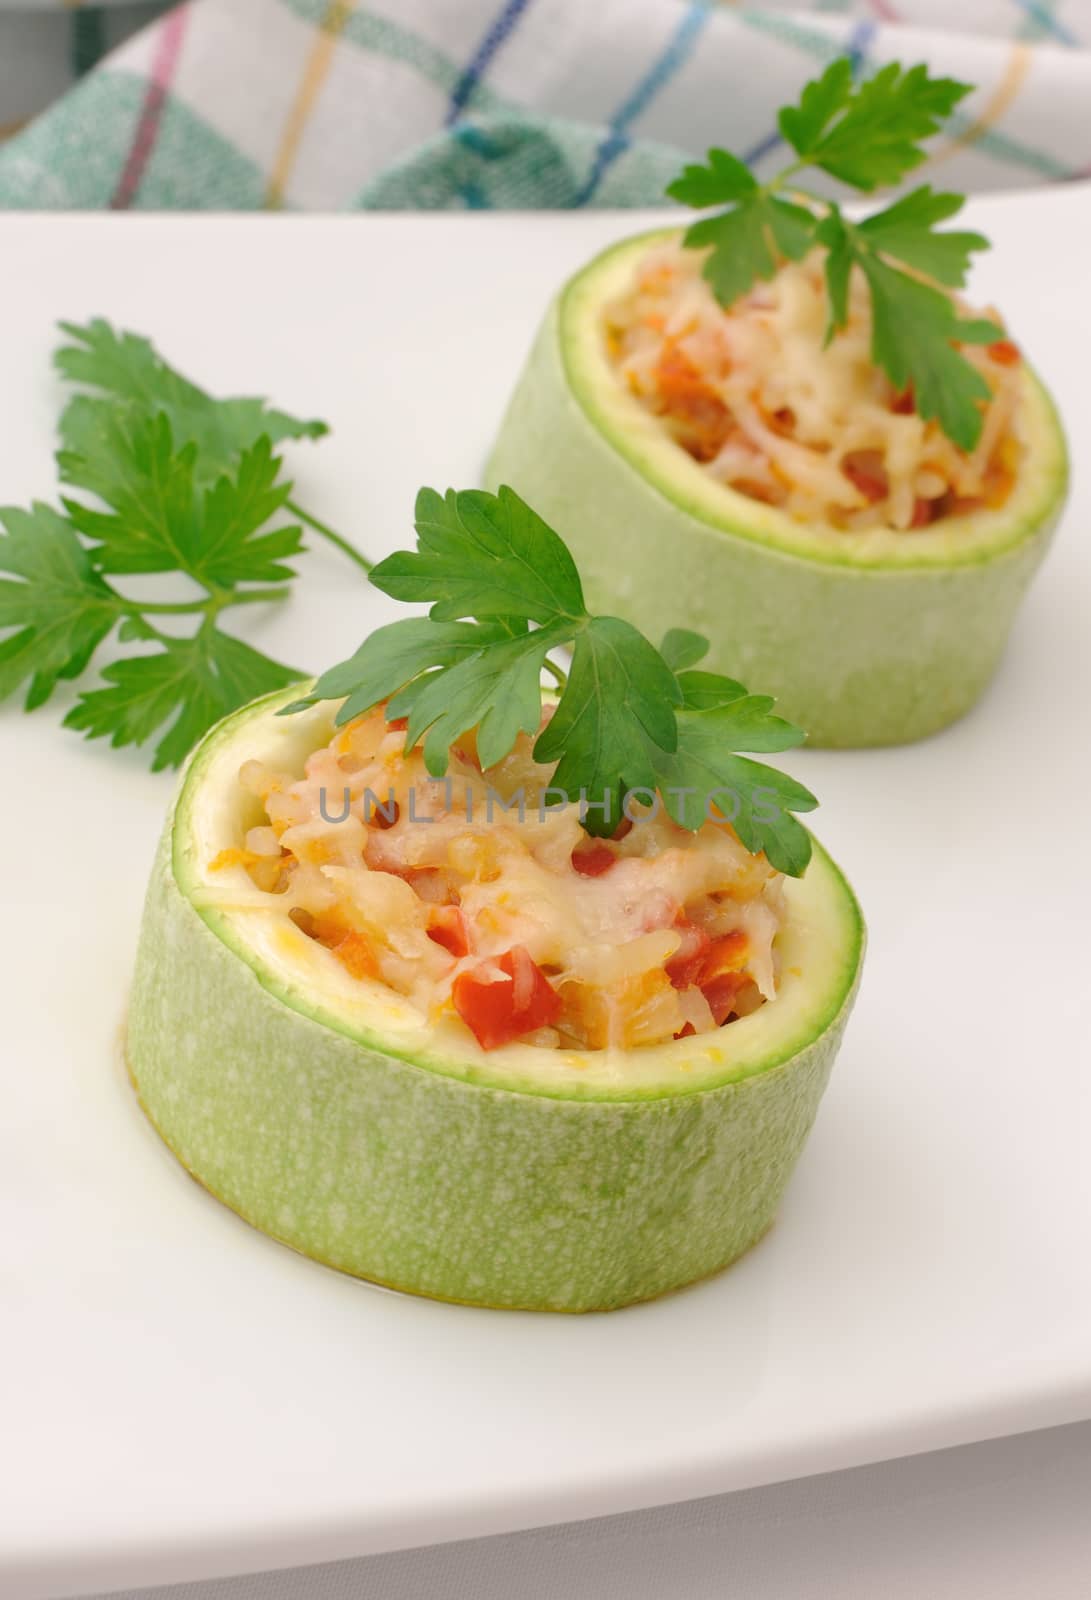 Zucchini stuffed with vegetables with rice and cheese by Apolonia